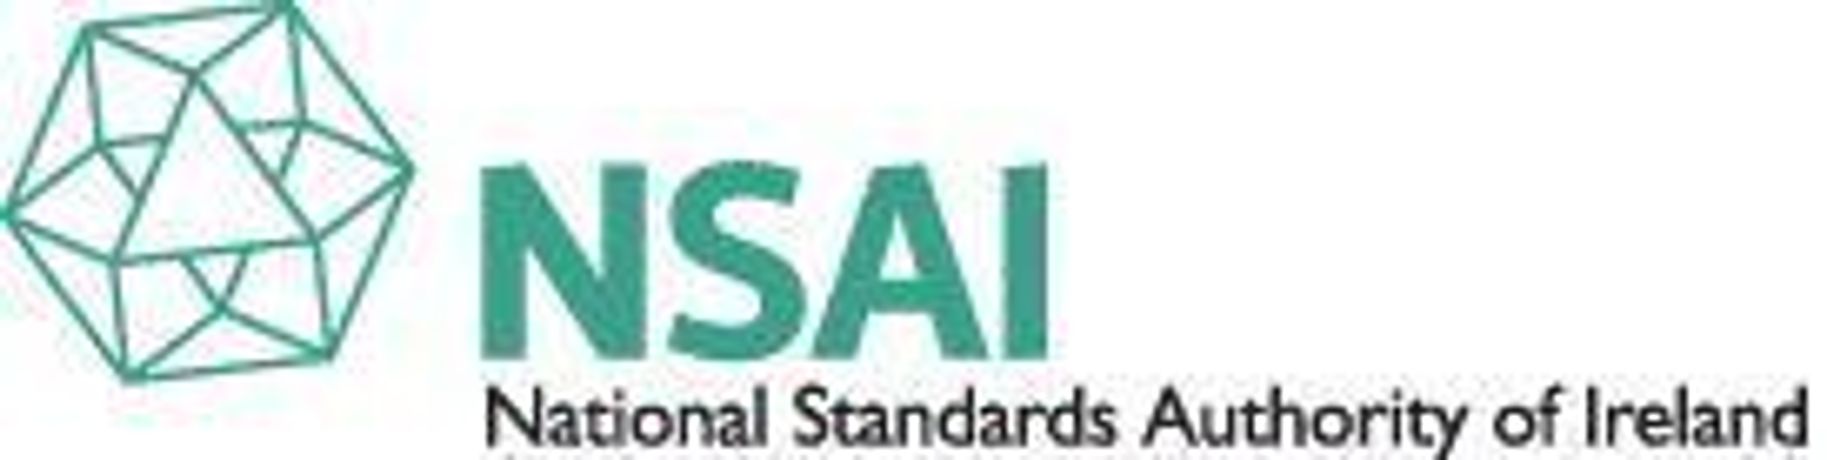 ISO 13485 Medical Device Manufacturing System Quality Management Certification from NSAI